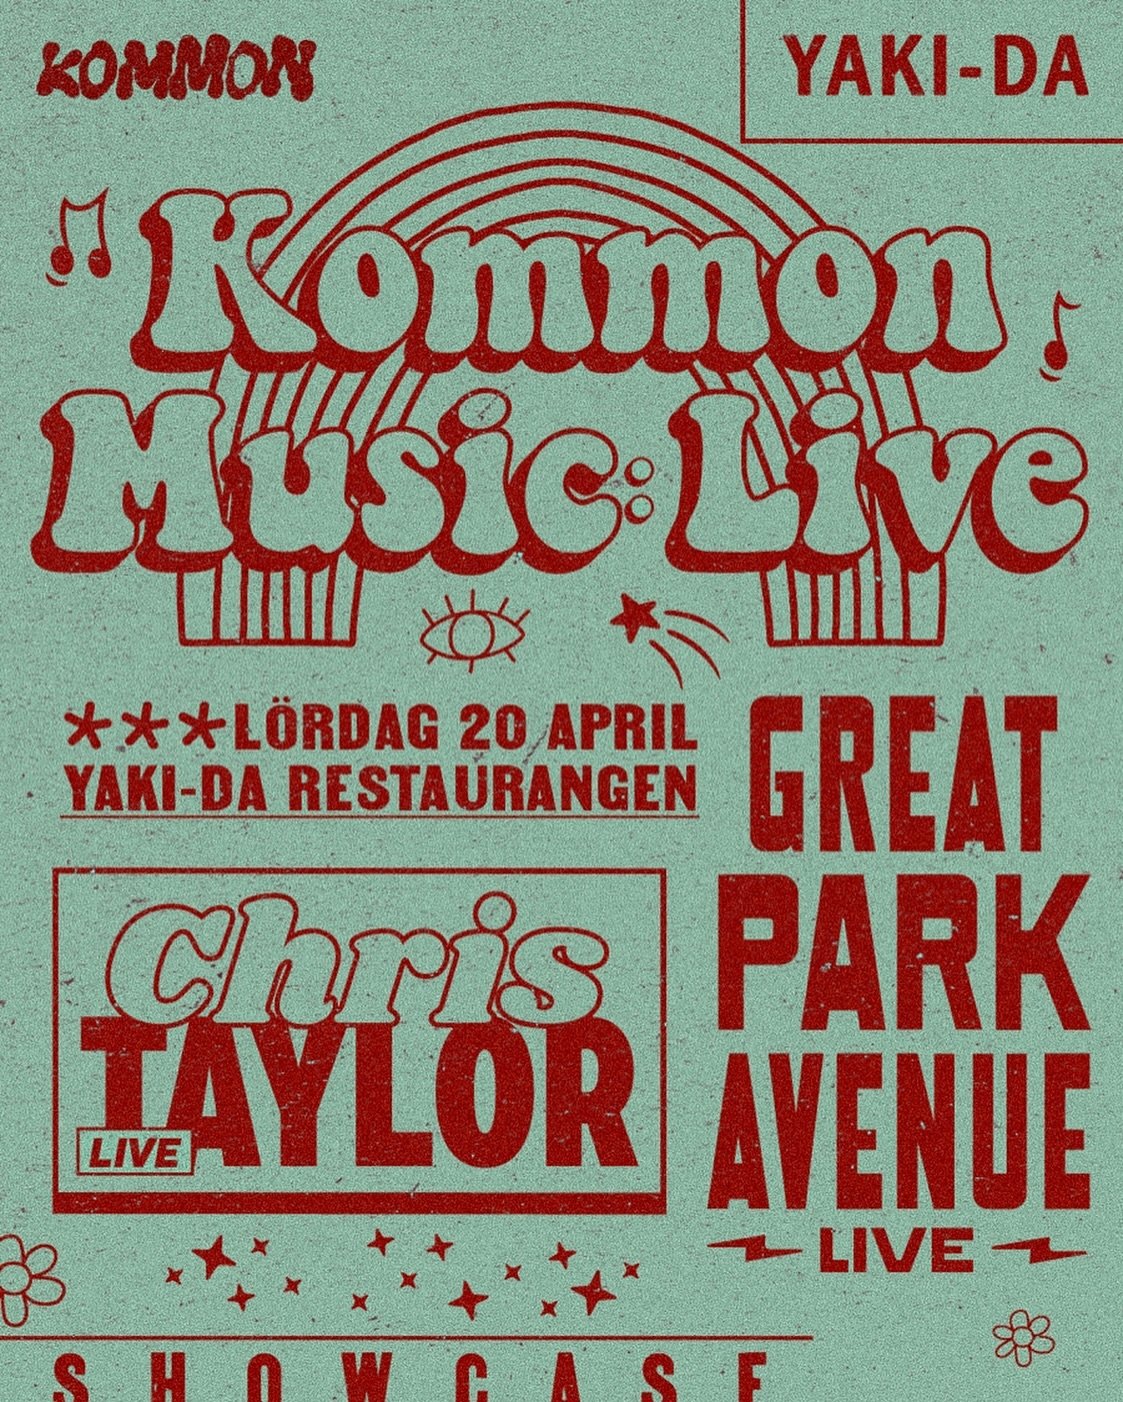 KOMMON MUSIC LIVE
Chris Taylor &amp; Great Park Avenue 
L&ouml;rdag 20e April! GBG we coming for you! Sign up: Link i bio!